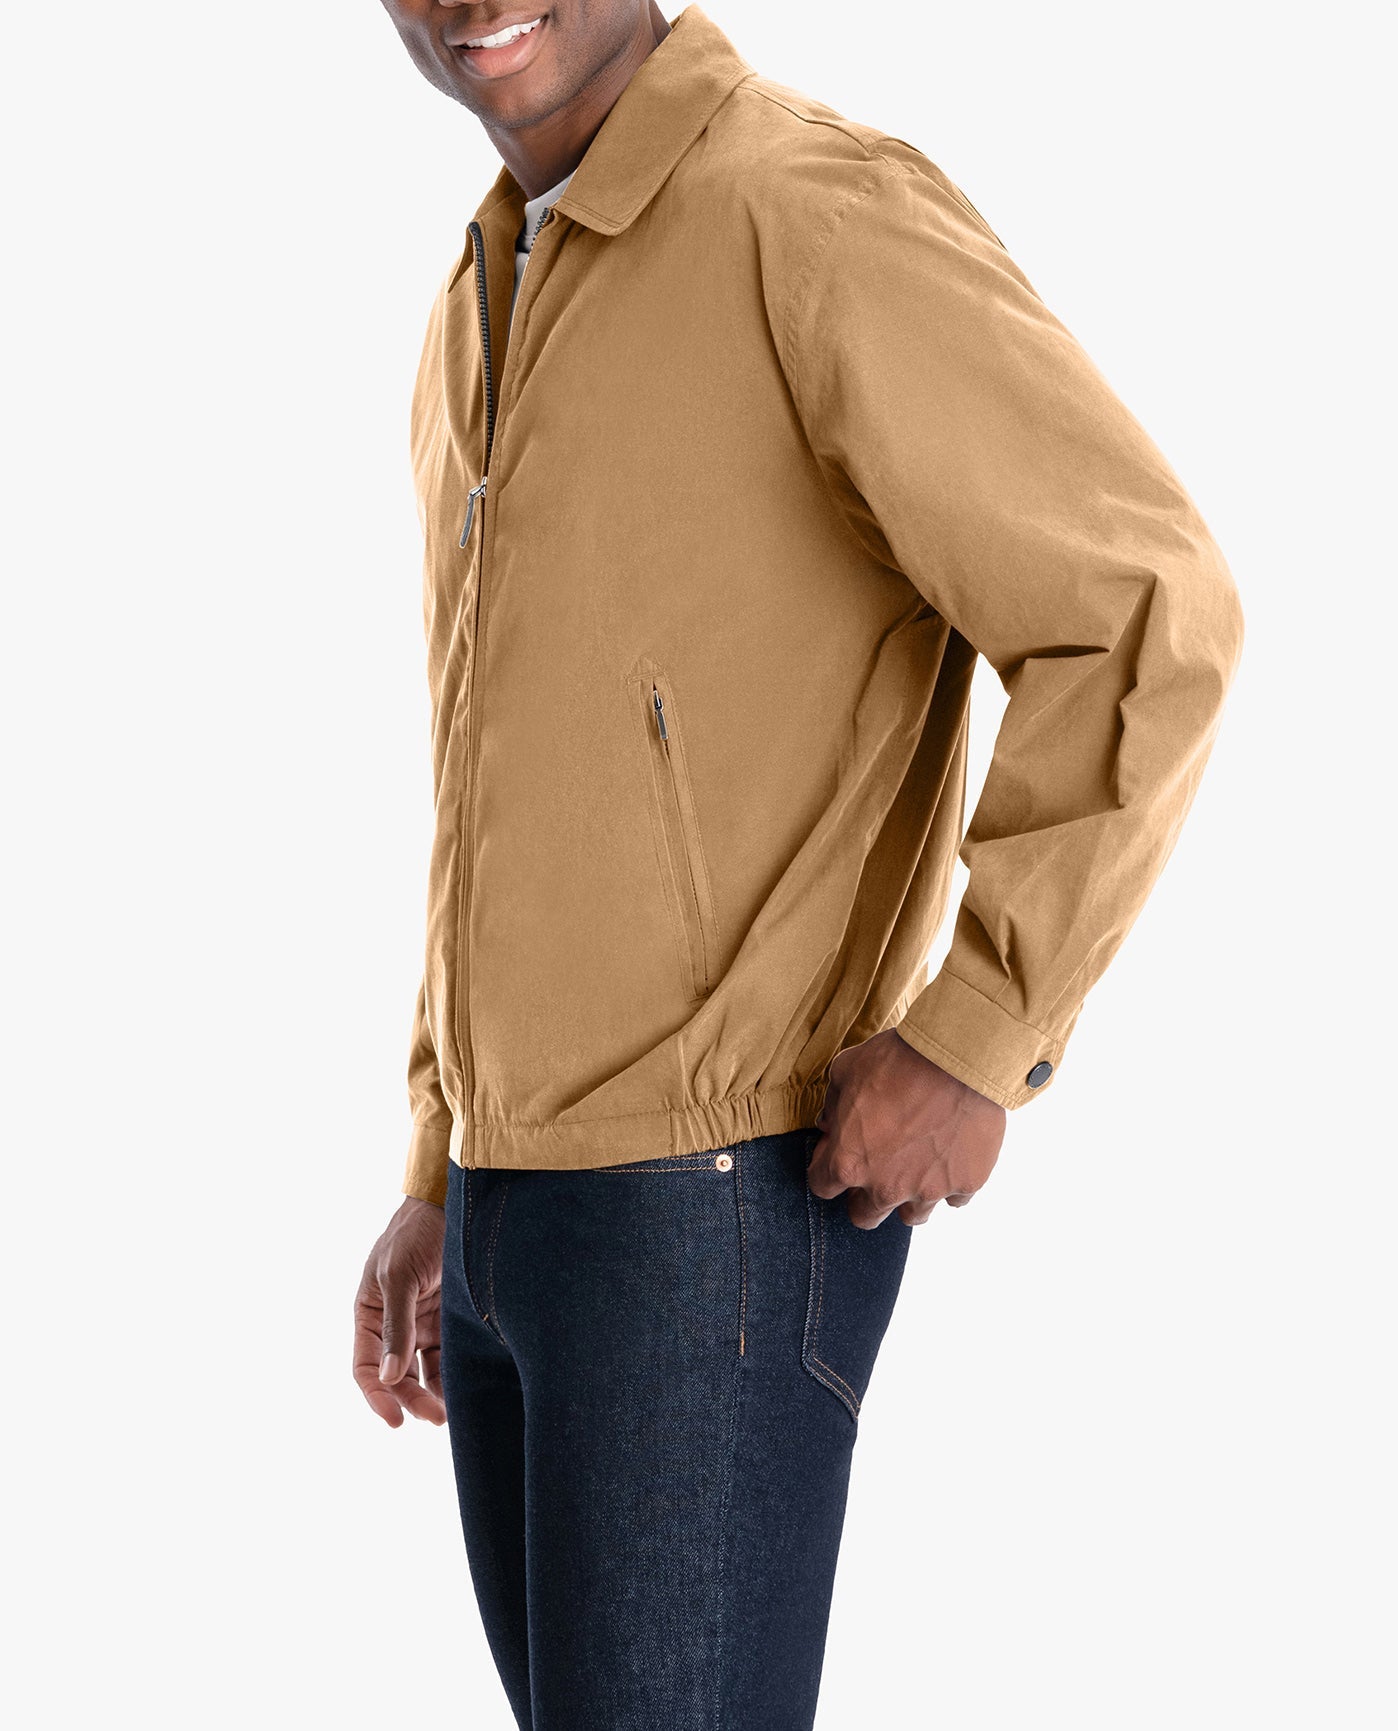 BACK VIEW OF EXTENDED LIGHT WEIGHT ZIP FRONT GOLF JACKET | CAMEL